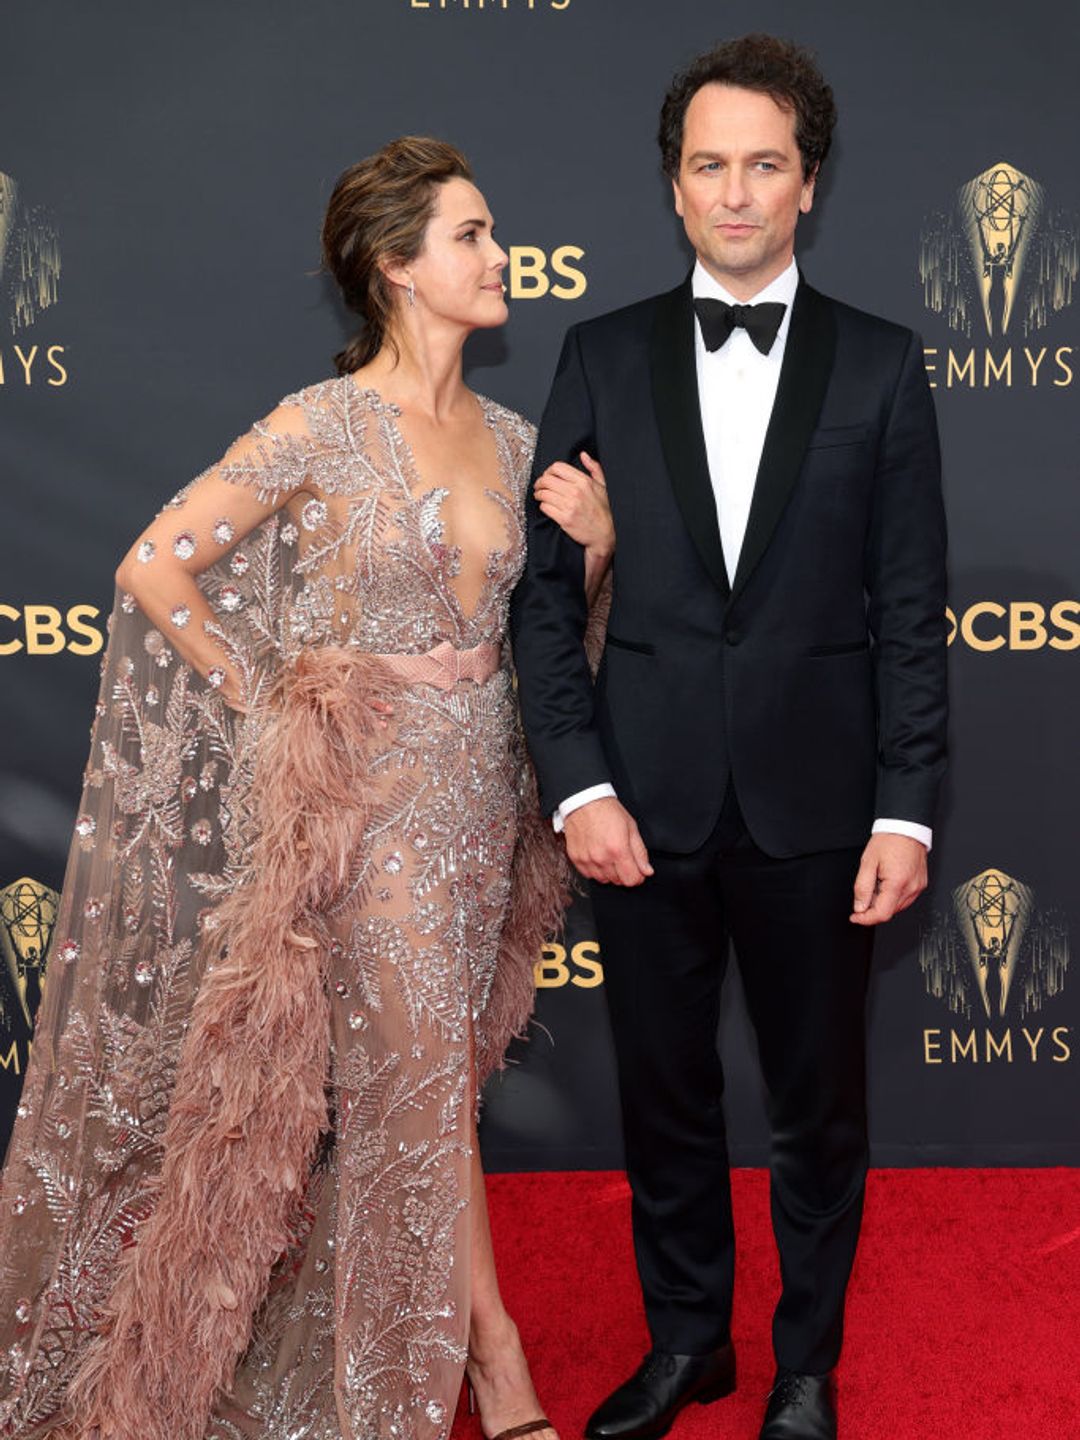 Keri Russell and Matthew Rhys on the red carpet together